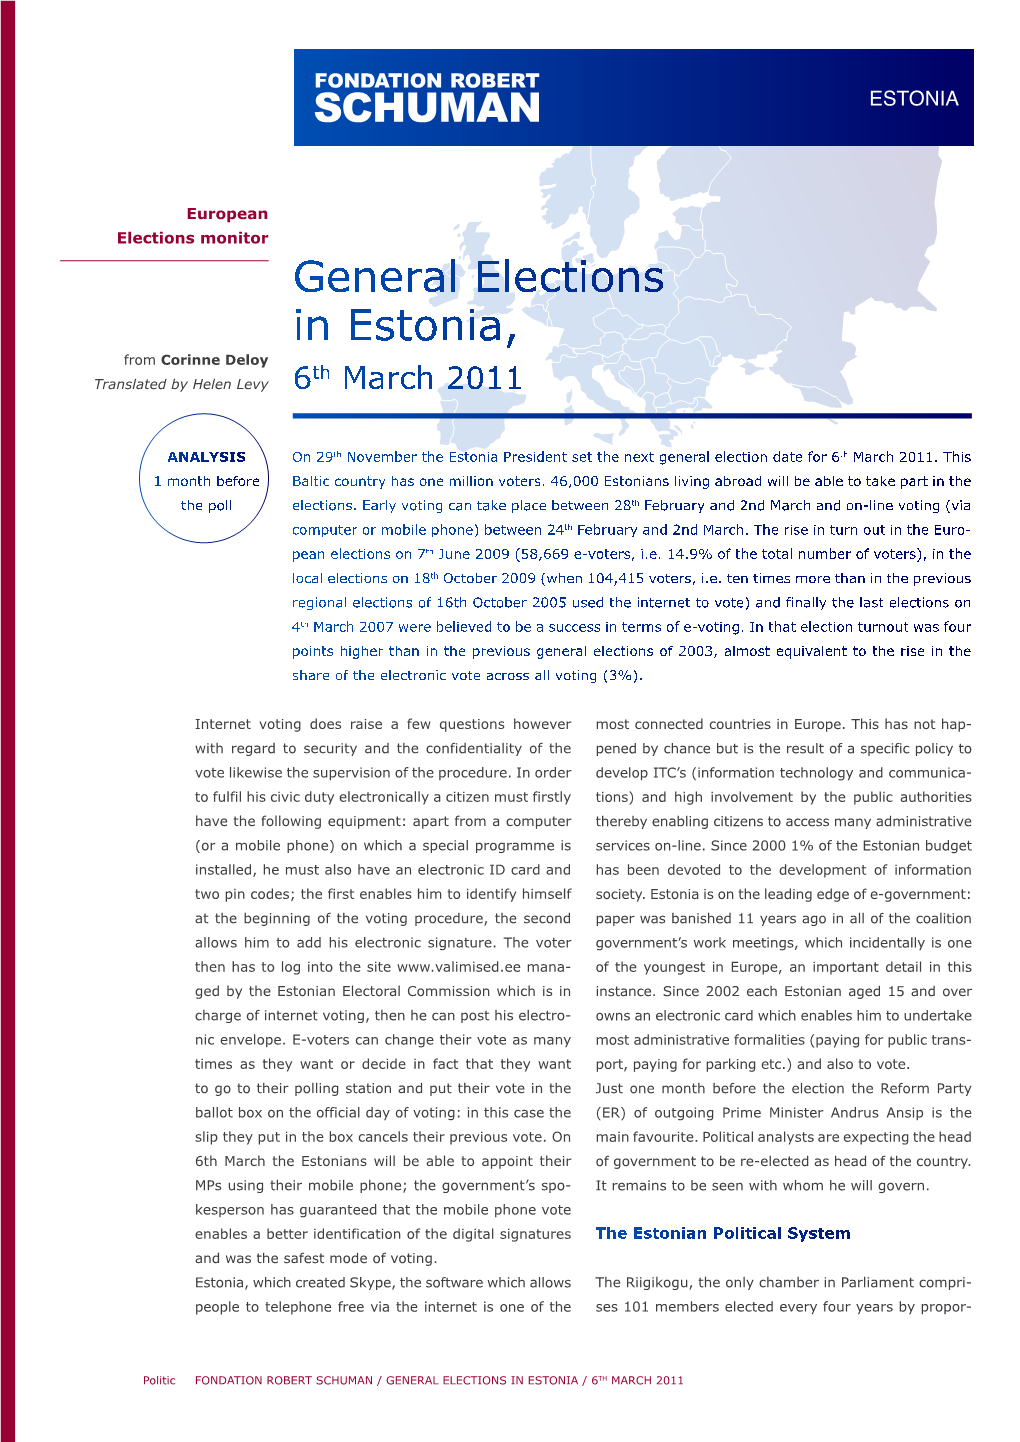 General Elections in Estonia, from Corinne Deloy Th Translated by Helen Levy 6 March 2011